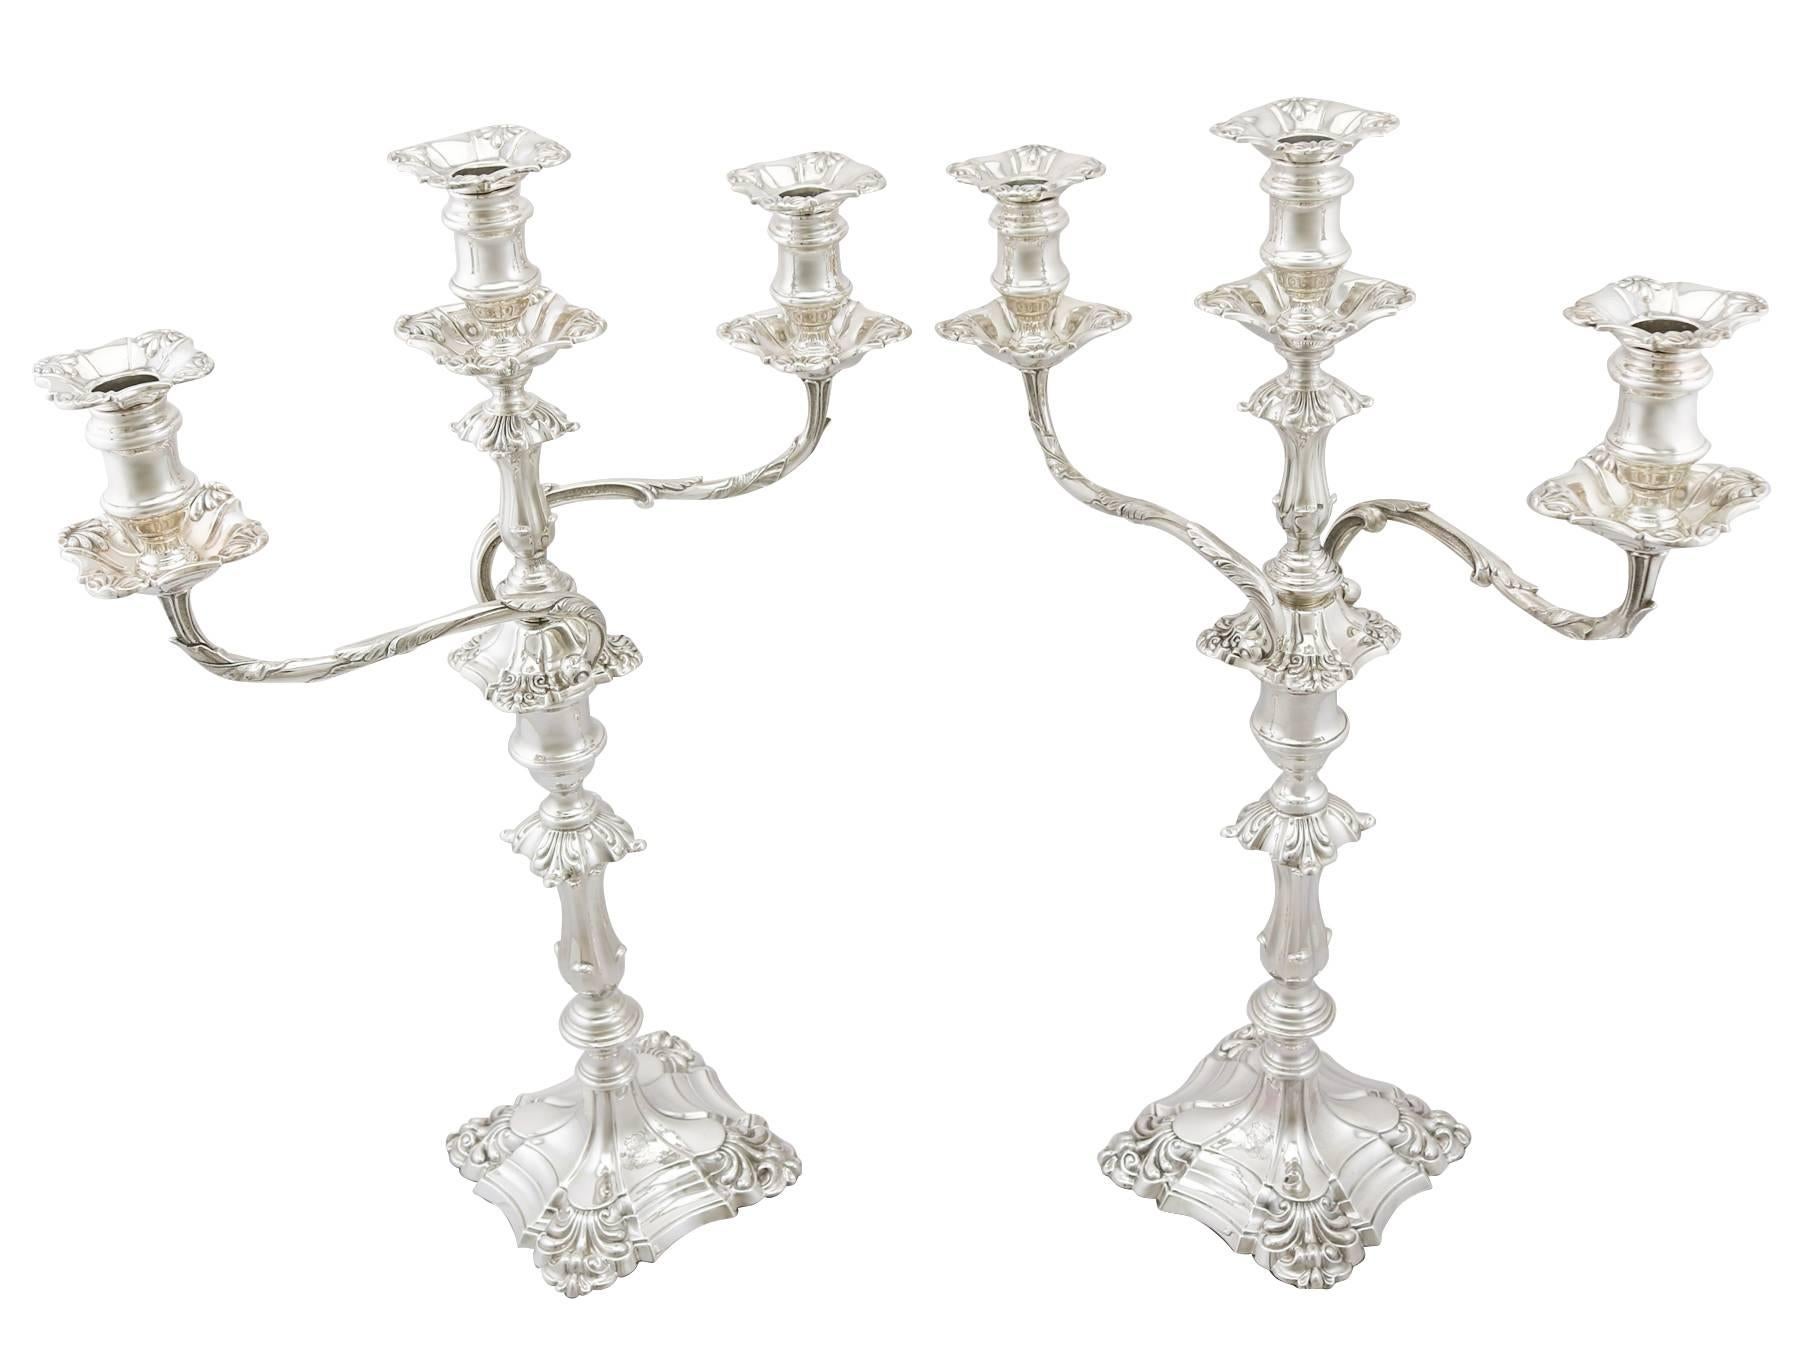 An exceptional, fine and impressive pair of antique Edwardian English sterling silver three-light candelabra made by Mappin & Webb Ltd; an addition to our ornamental silverware collection.

These exceptional antique Edwardian sterling silver